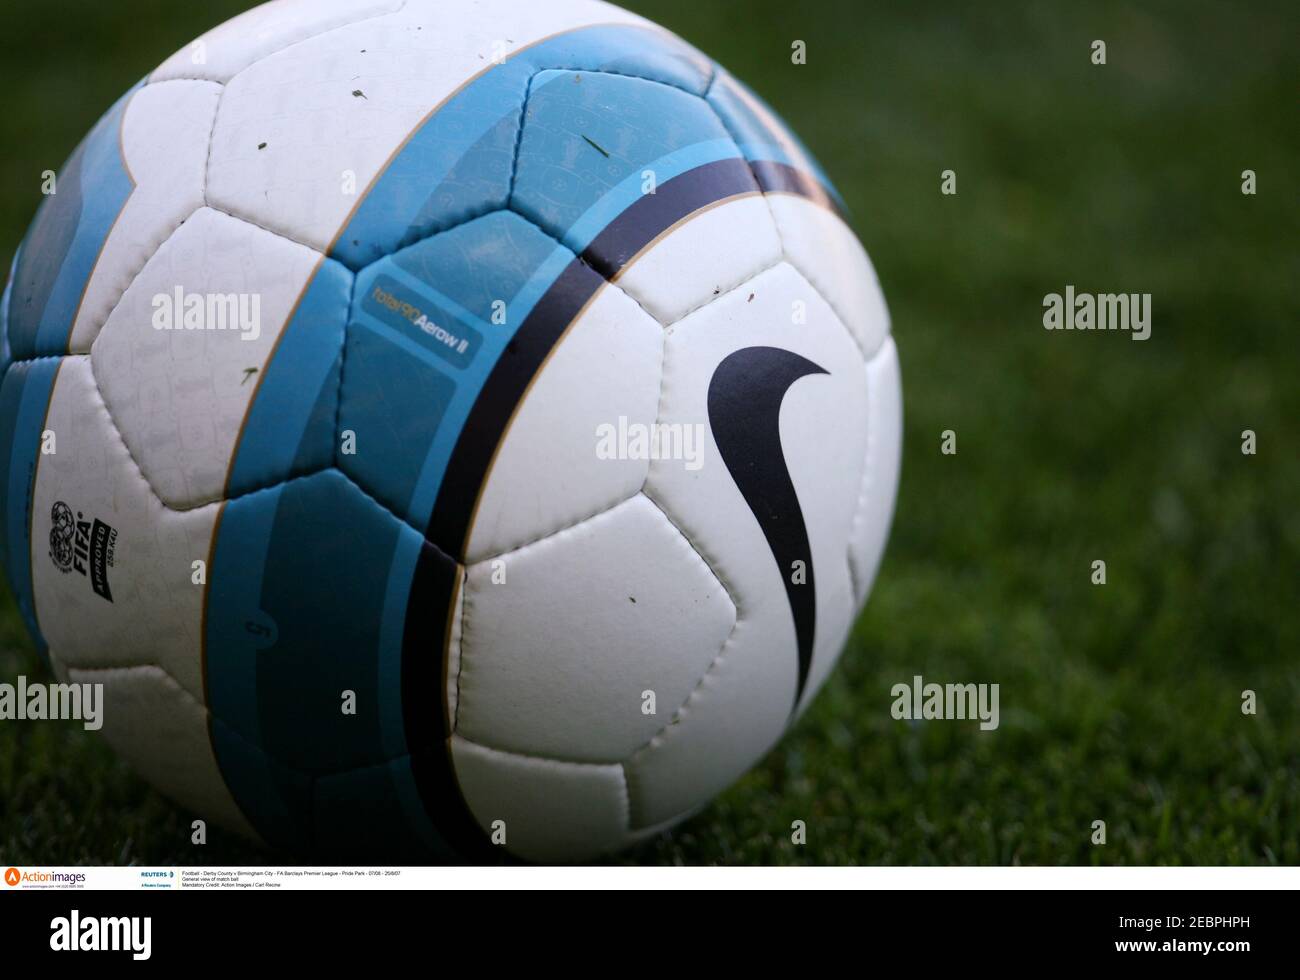 Football - Derby County v Birmingham City - FA Barclays Premier League -  Pride Park - 07/08 - 25/8/07 General view of Nike match ball Mandatory  Credit: Action Images / Carl Recine Stock Photo - Alamy